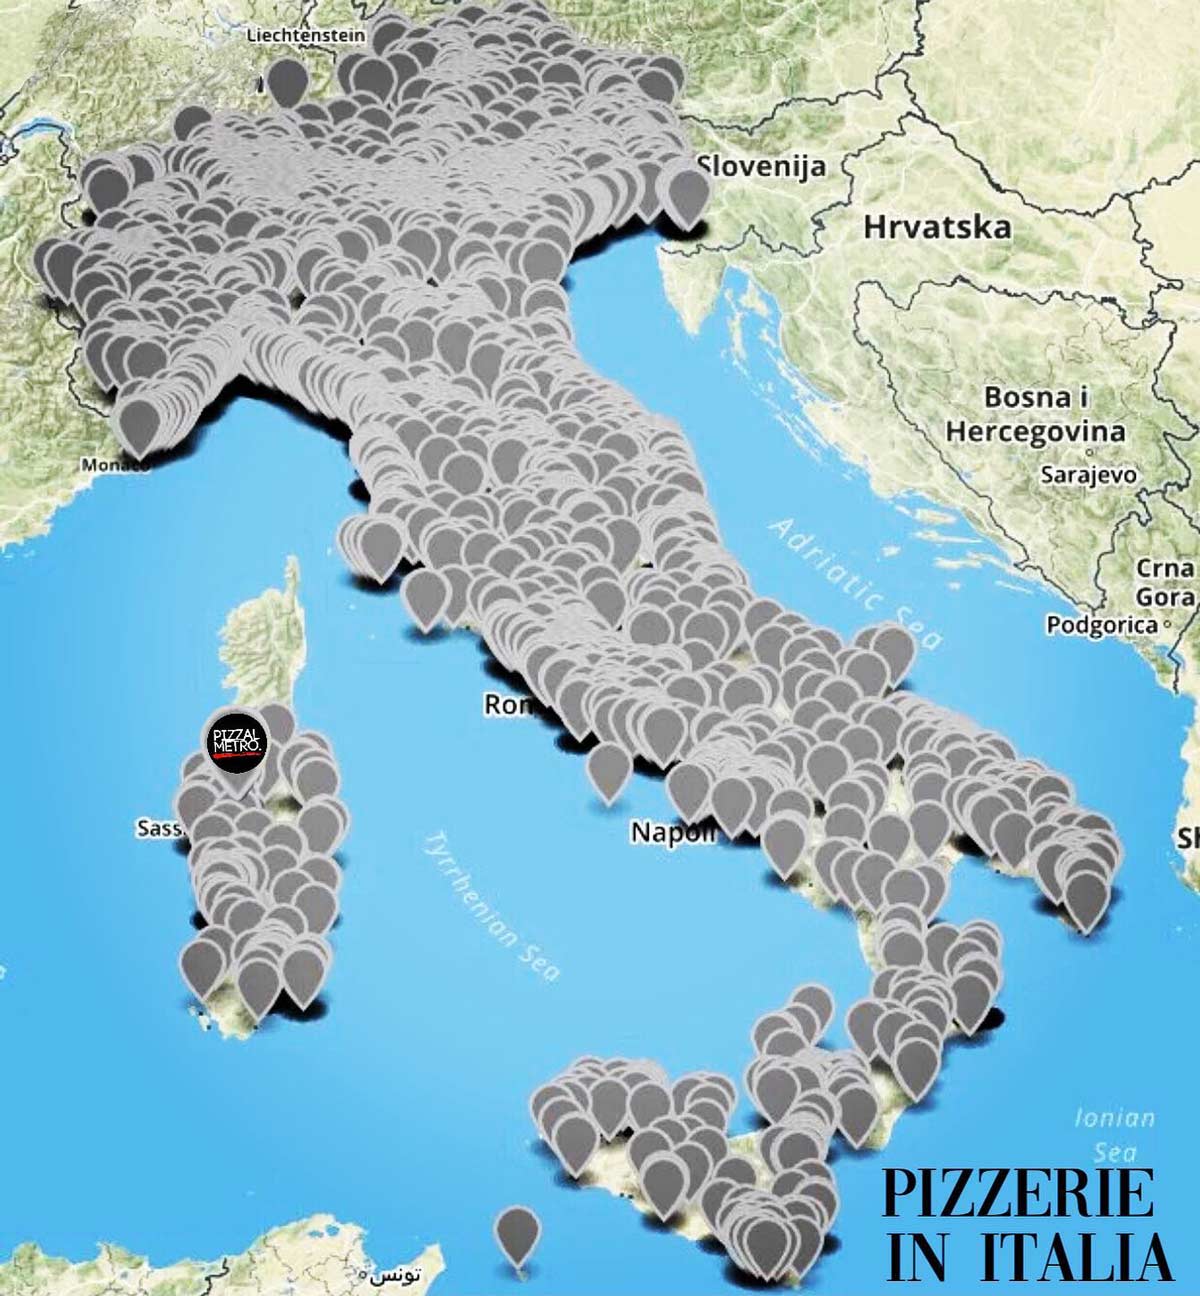 Map of Pizzerias in Italy